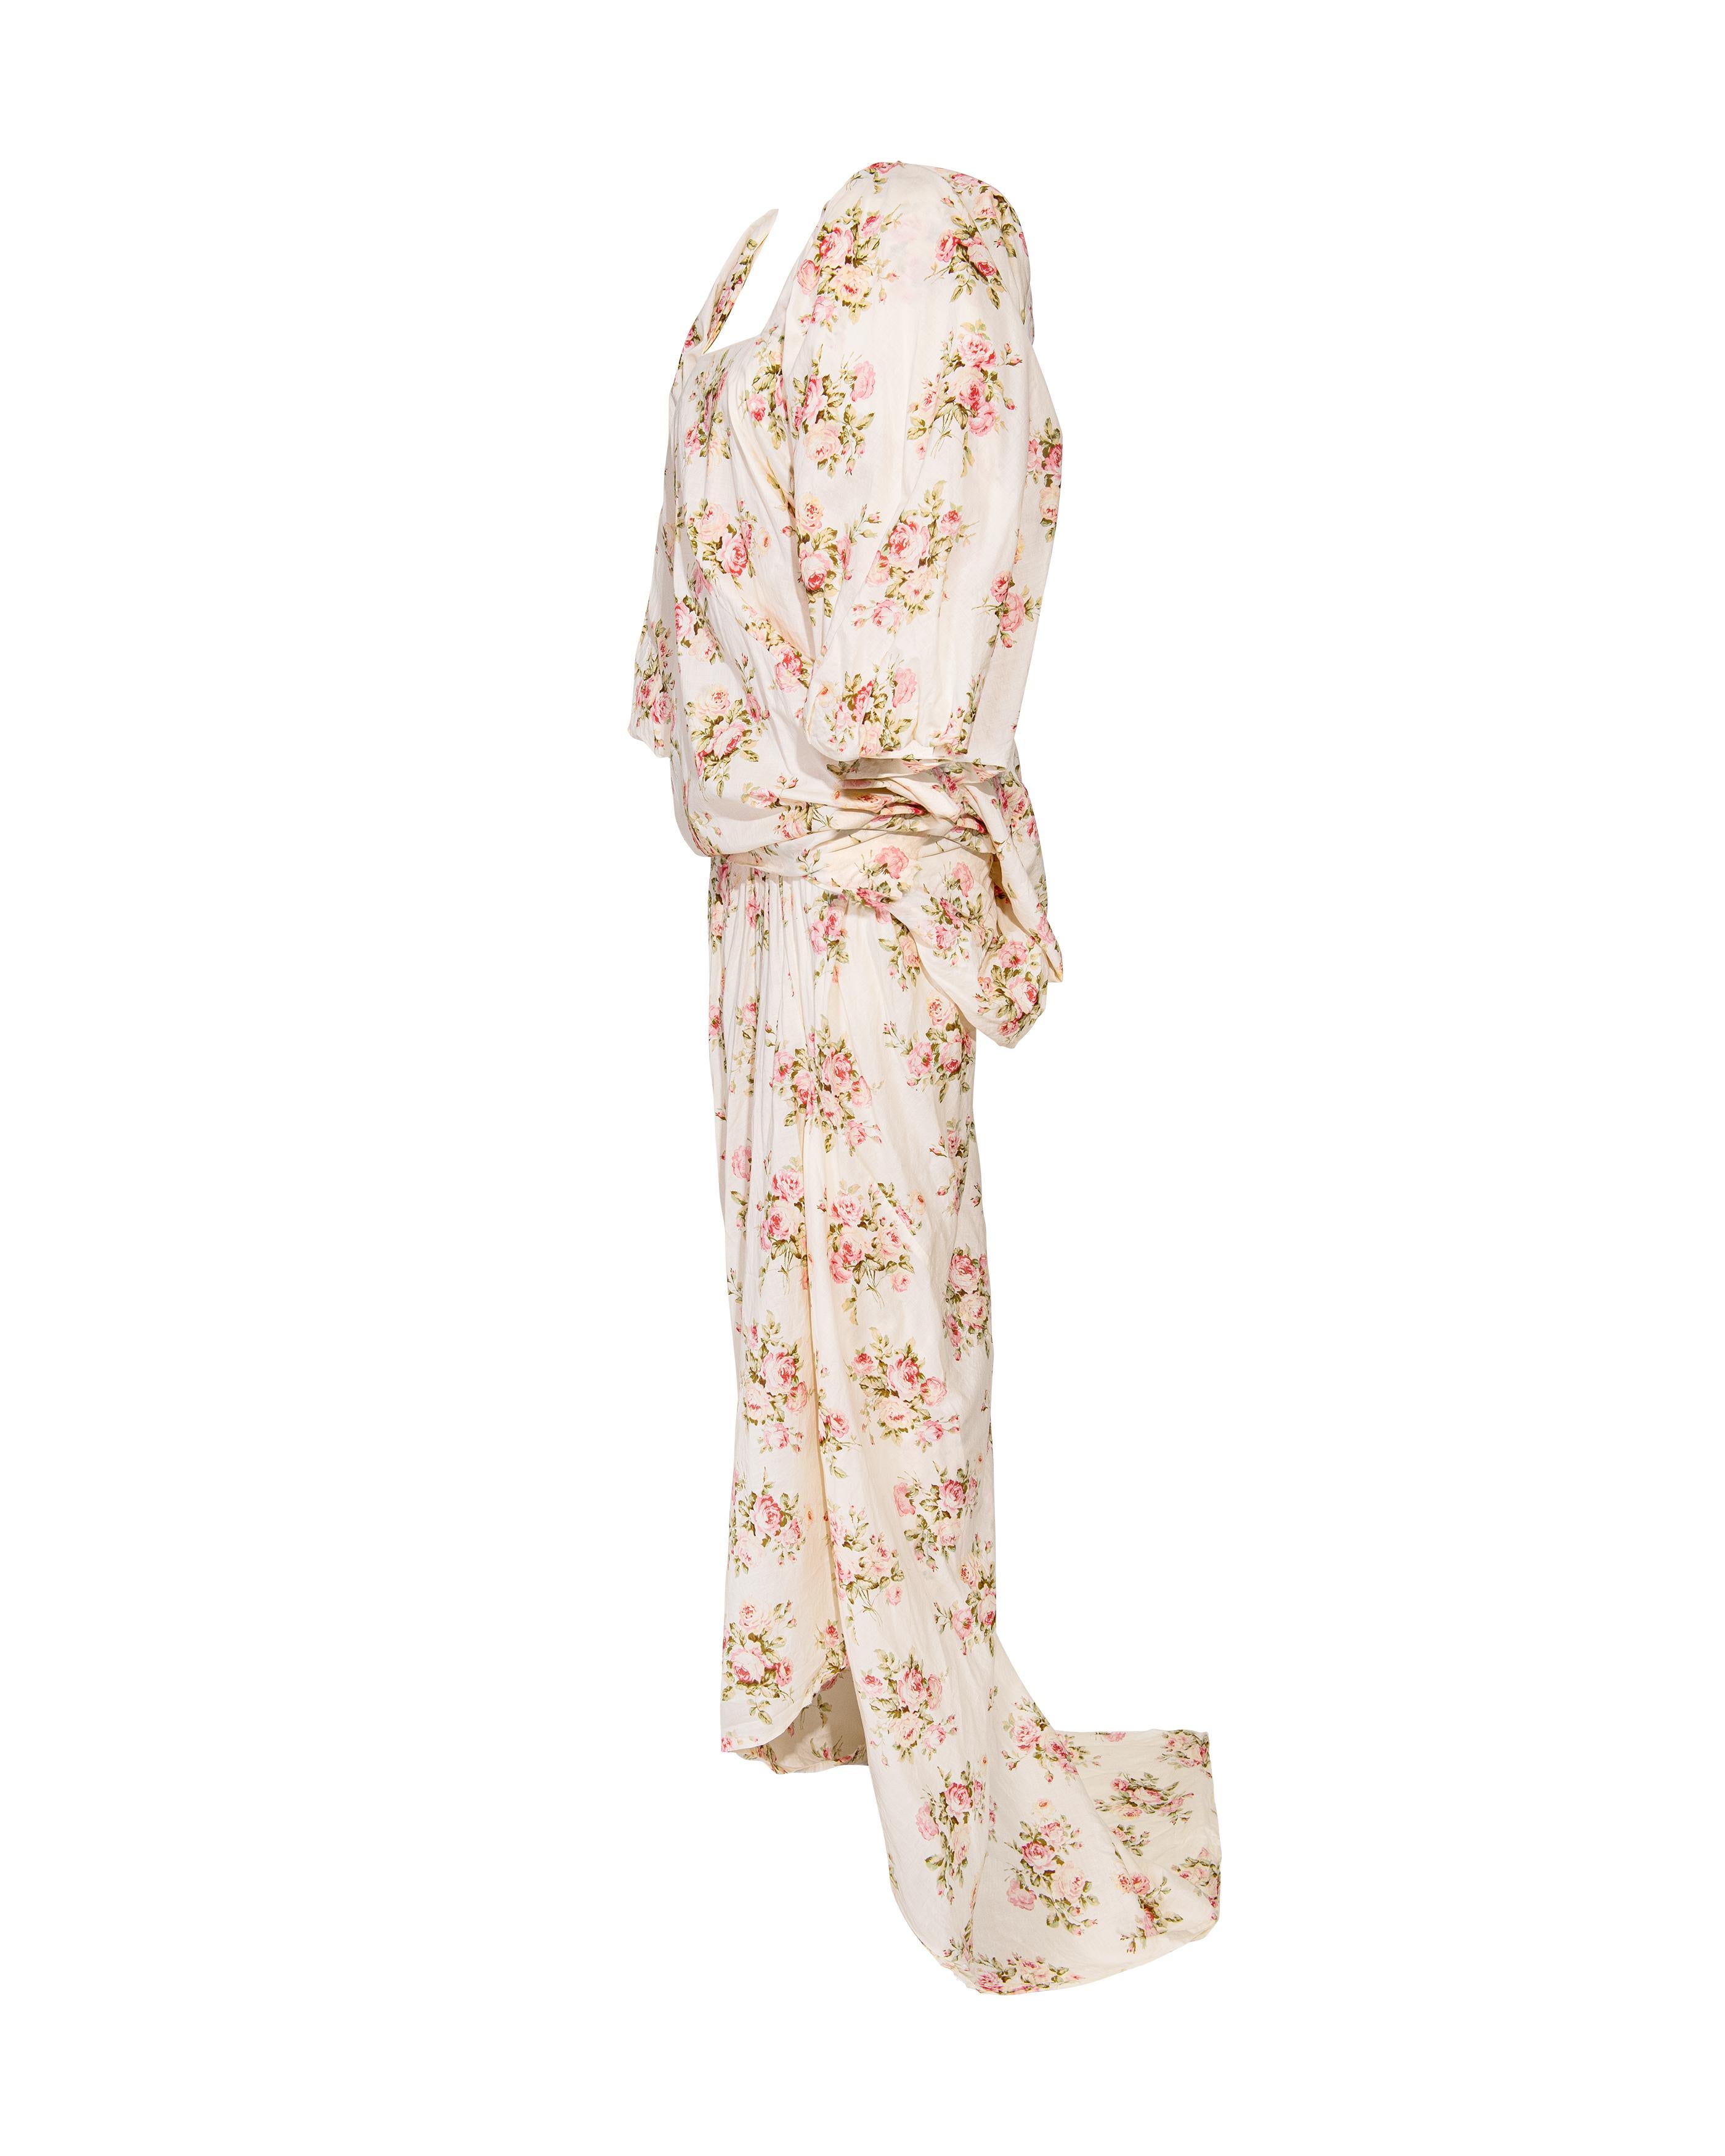 Women's S/S 2008 Junya Watanabe Ecru Cotton Dress with Pink Floral Pattern For Sale